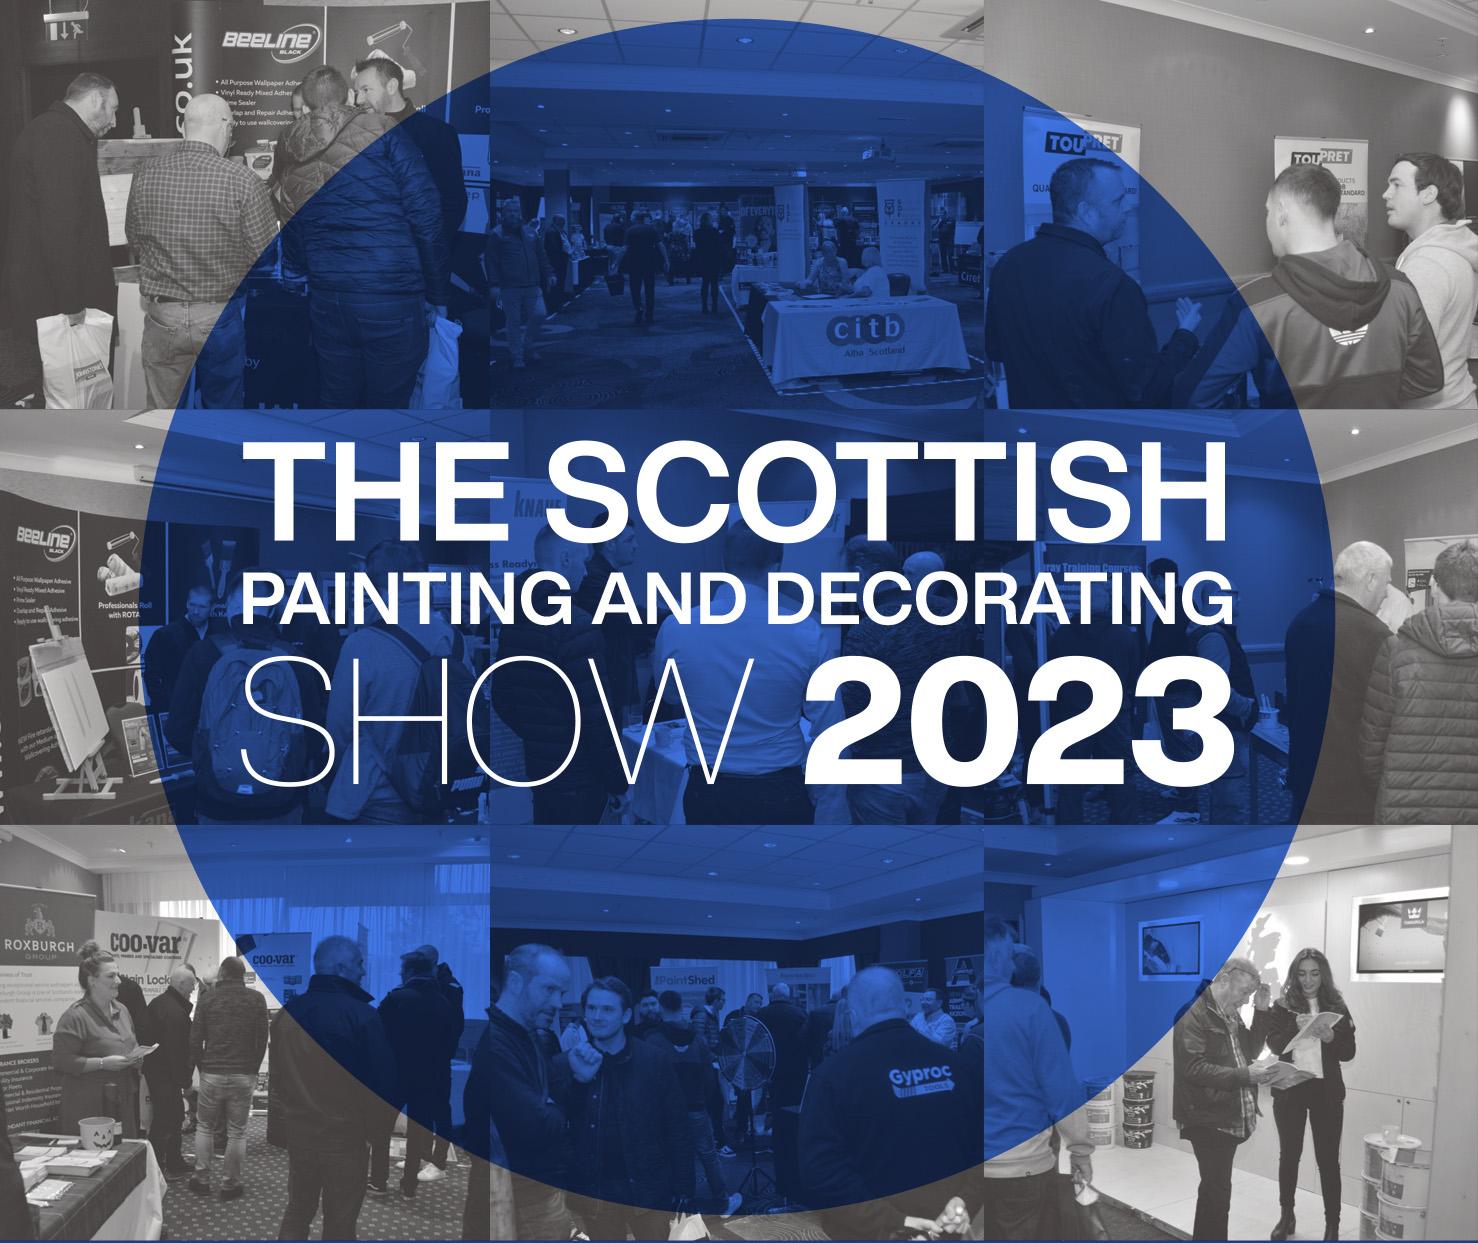 The Scottish Painting and Decorating Show 2023